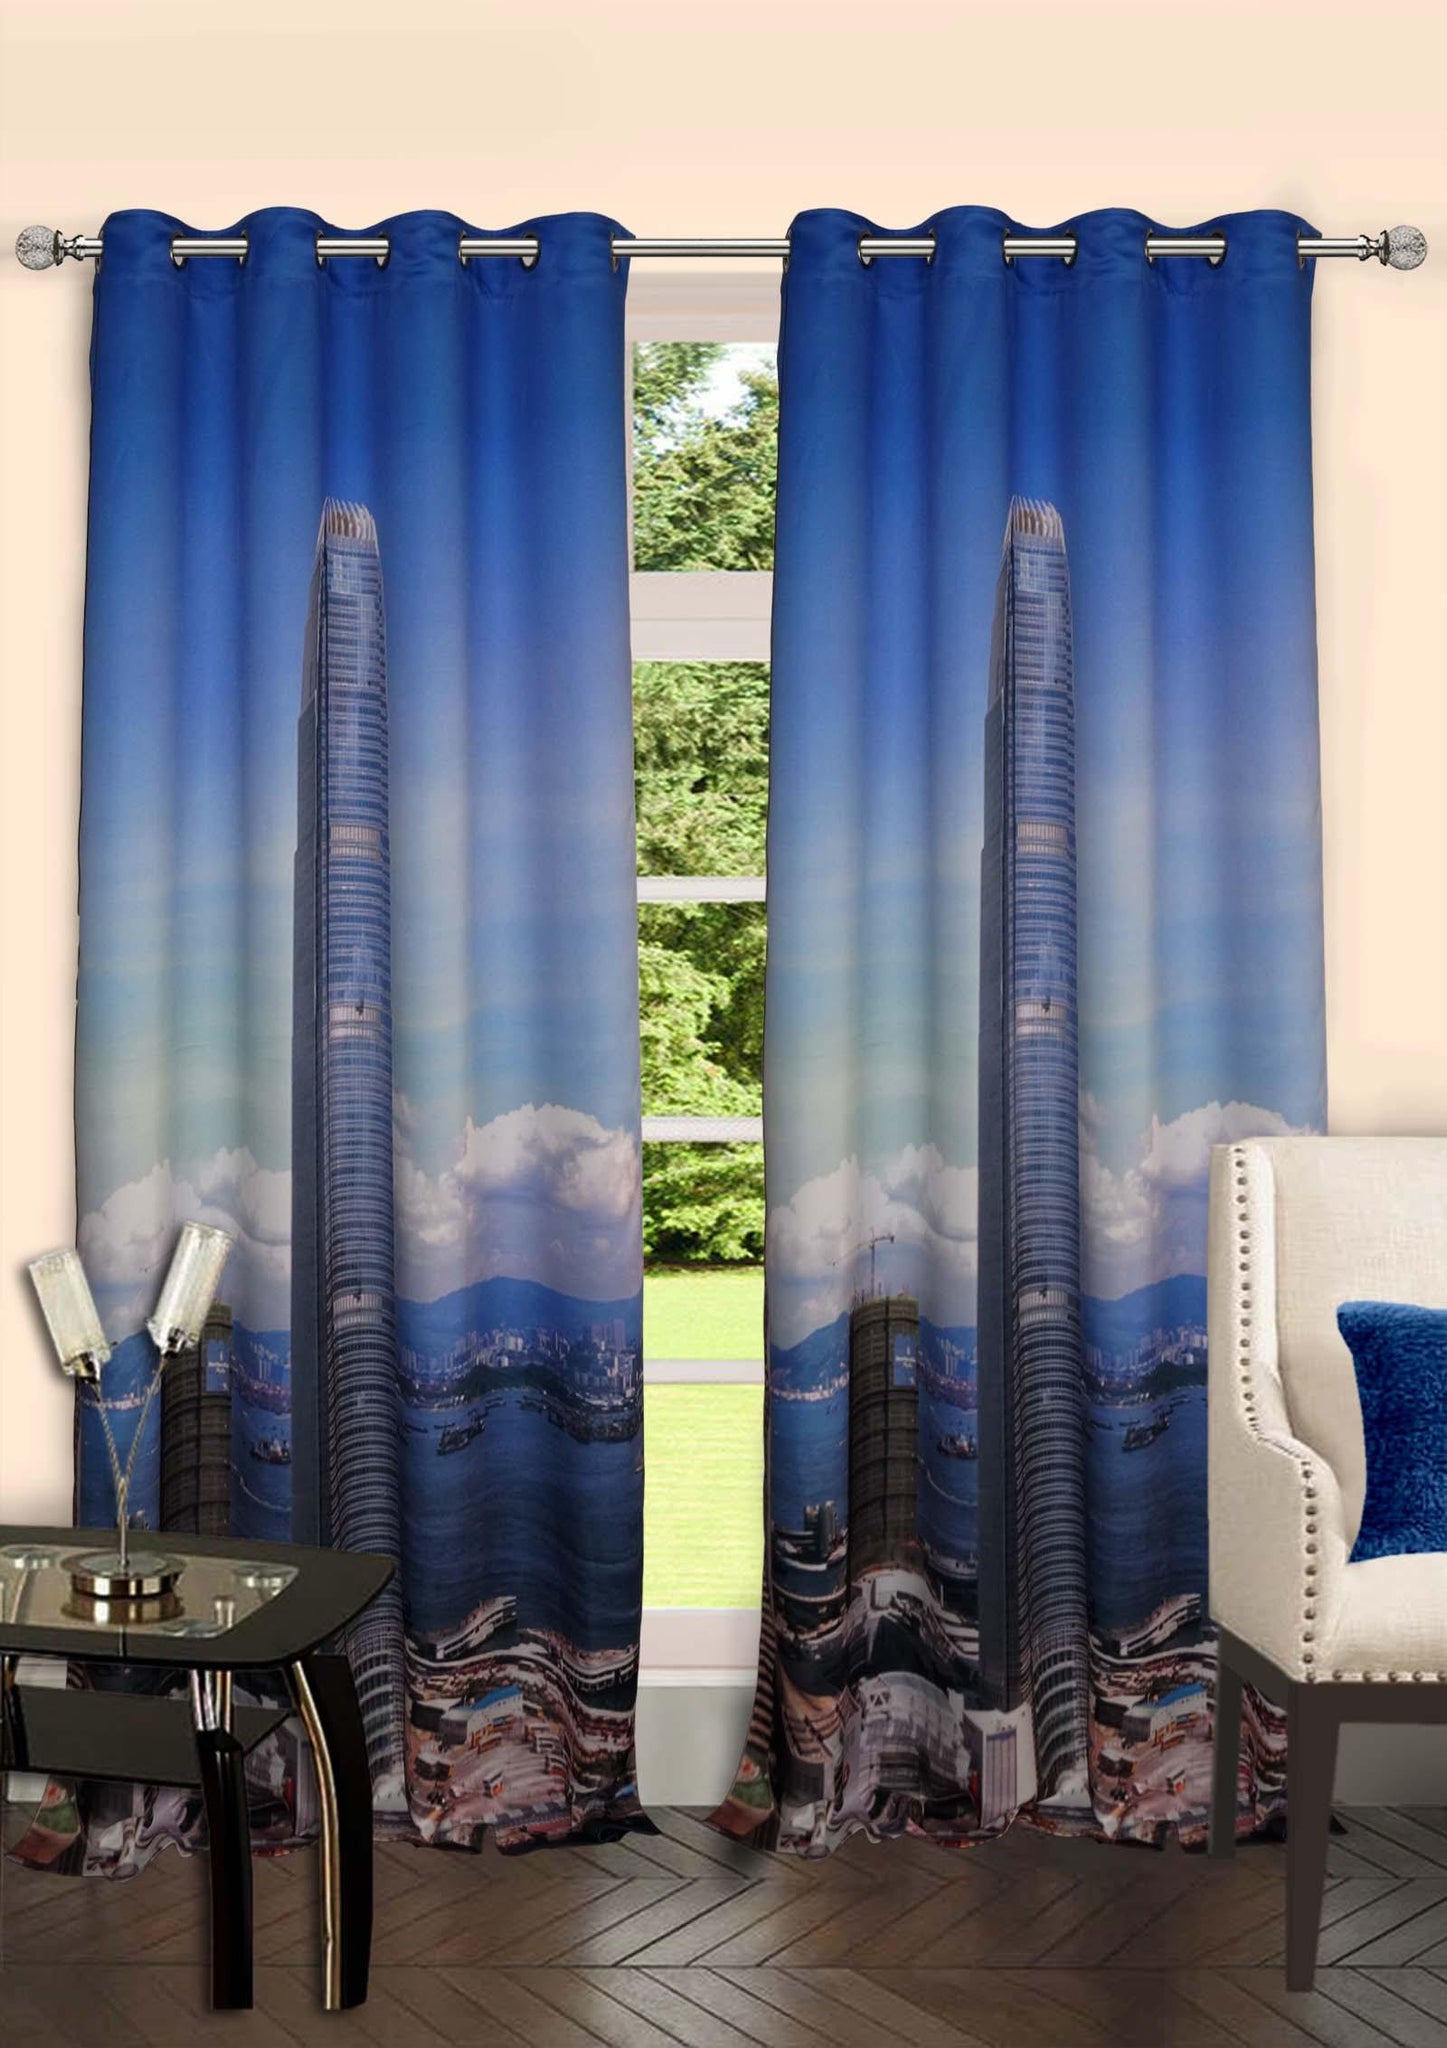 Lushomes Digitally Printed Skyscraper Polyster Curtains with 8 Metal Eyelets - Lushomes